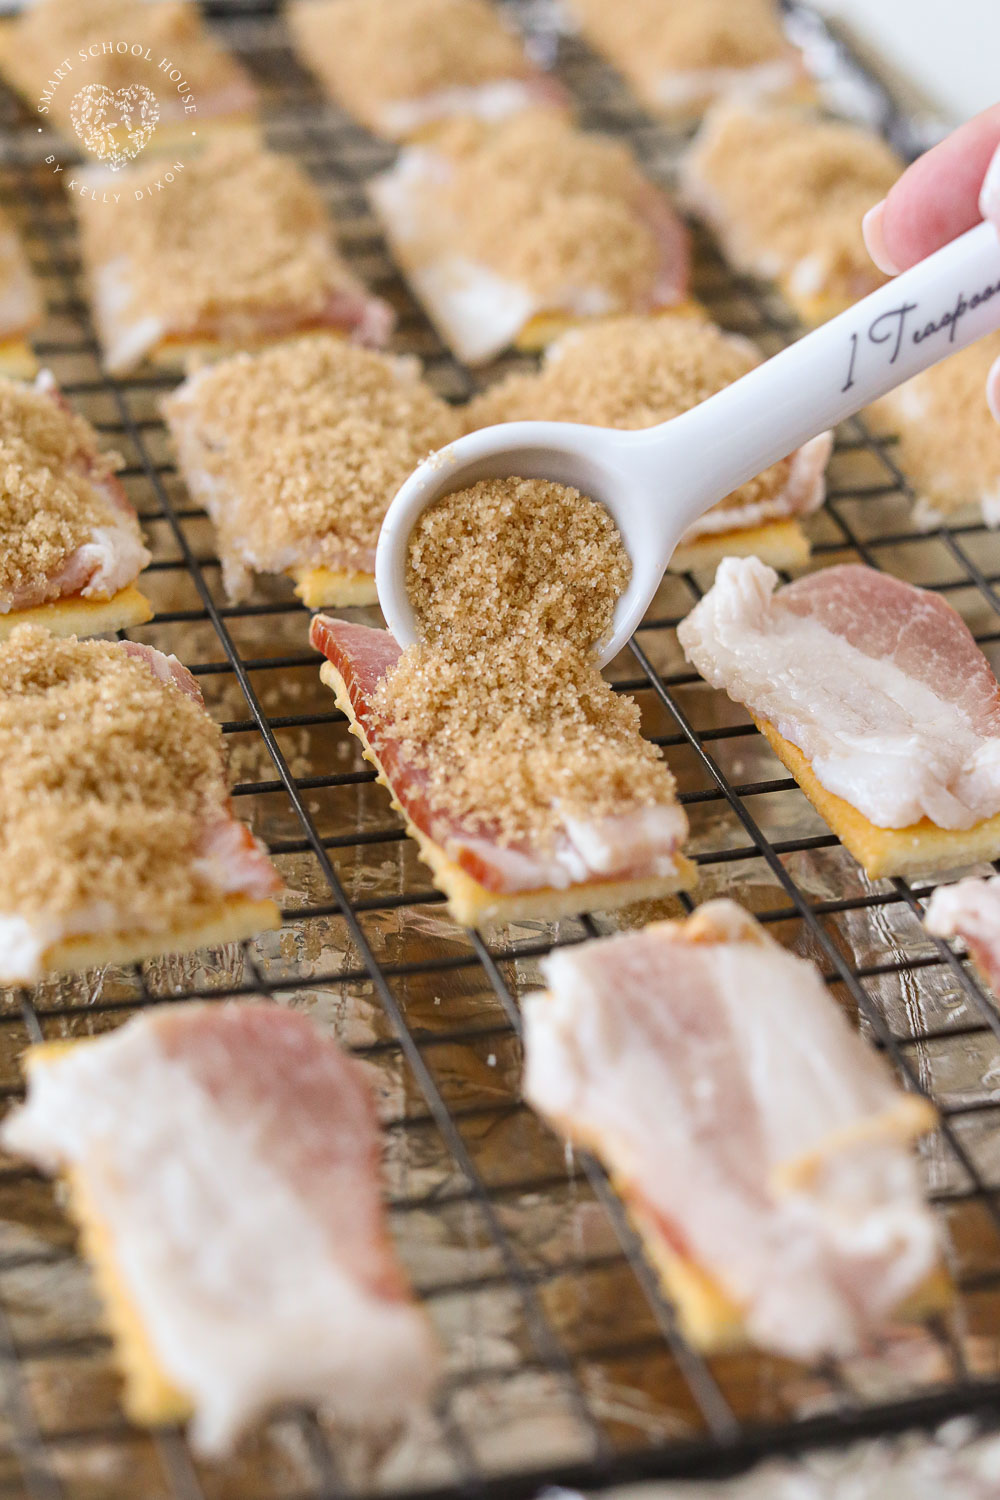 Putting brown sugar on bacon and Club crackers